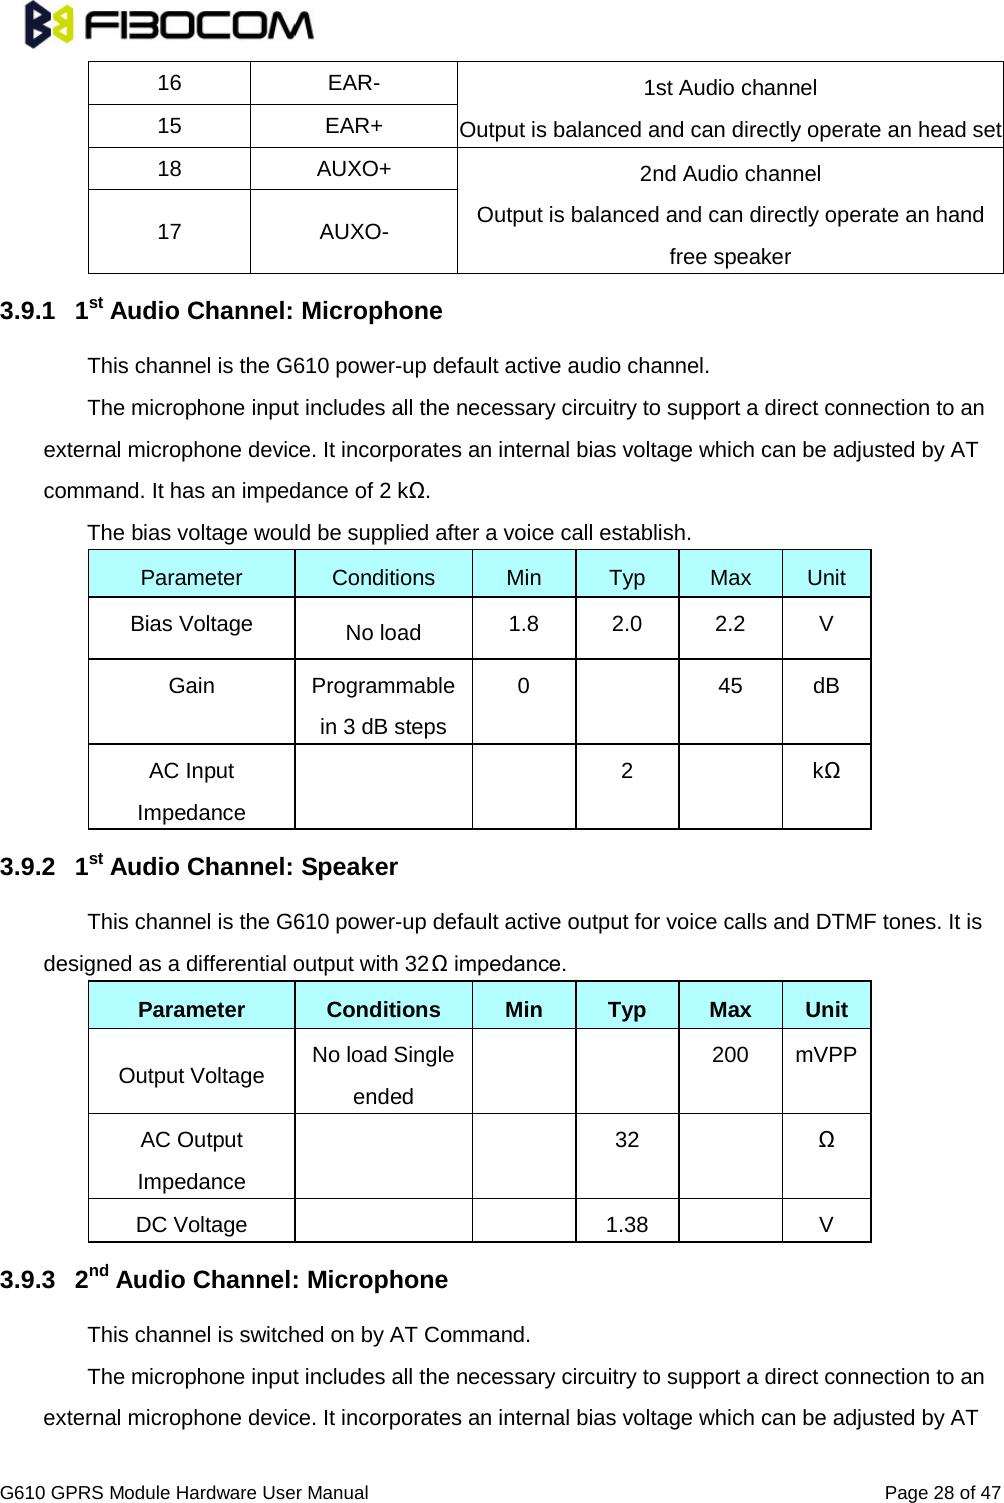                                                                                                          G610 GPRS Module Hardware User Manual                                                          Page 28 of 47  16 EAR-  1st Audio channel Output is balanced and can directly operate an head set 15 EAR+ 18 AUXO+ 2nd Audio channel Output is balanced and can directly operate an hand free speaker 17 AUXO- 3.9.1  1st Audio Channel: Microphone This channel is the G610 power-up default active audio channel.   The microphone input includes all the necessary circuitry to support a direct connection to an external microphone device. It incorporates an internal bias voltage which can be adjusted by AT command. It has an impedance of 2 kΩ.   The bias voltage would be supplied after a voice call establish. Parameter Conditions Min Typ Max Unit Bias Voltage No load   1.8 2.0 2.2  V Gain Programmable in 3 dB steps 0    45 dB AC Input Impedance     2    kΩ 3.9.2  1st Audio Channel: Speaker This channel is the G610 power-up default active output for voice calls and DTMF tones. It is designed as a differential output with 32Ω impedance.   Parameter Conditions Min Typ Max Unit Output Voltage No load Single ended     200 mVPP AC Output Impedance     32    Ω DC Voltage      1.38    V 3.9.3  2nd Audio Channel: Microphone This channel is switched on by AT Command.   The microphone input includes all the necessary circuitry to support a direct connection to an external microphone device. It incorporates an internal bias voltage which can be adjusted by AT 